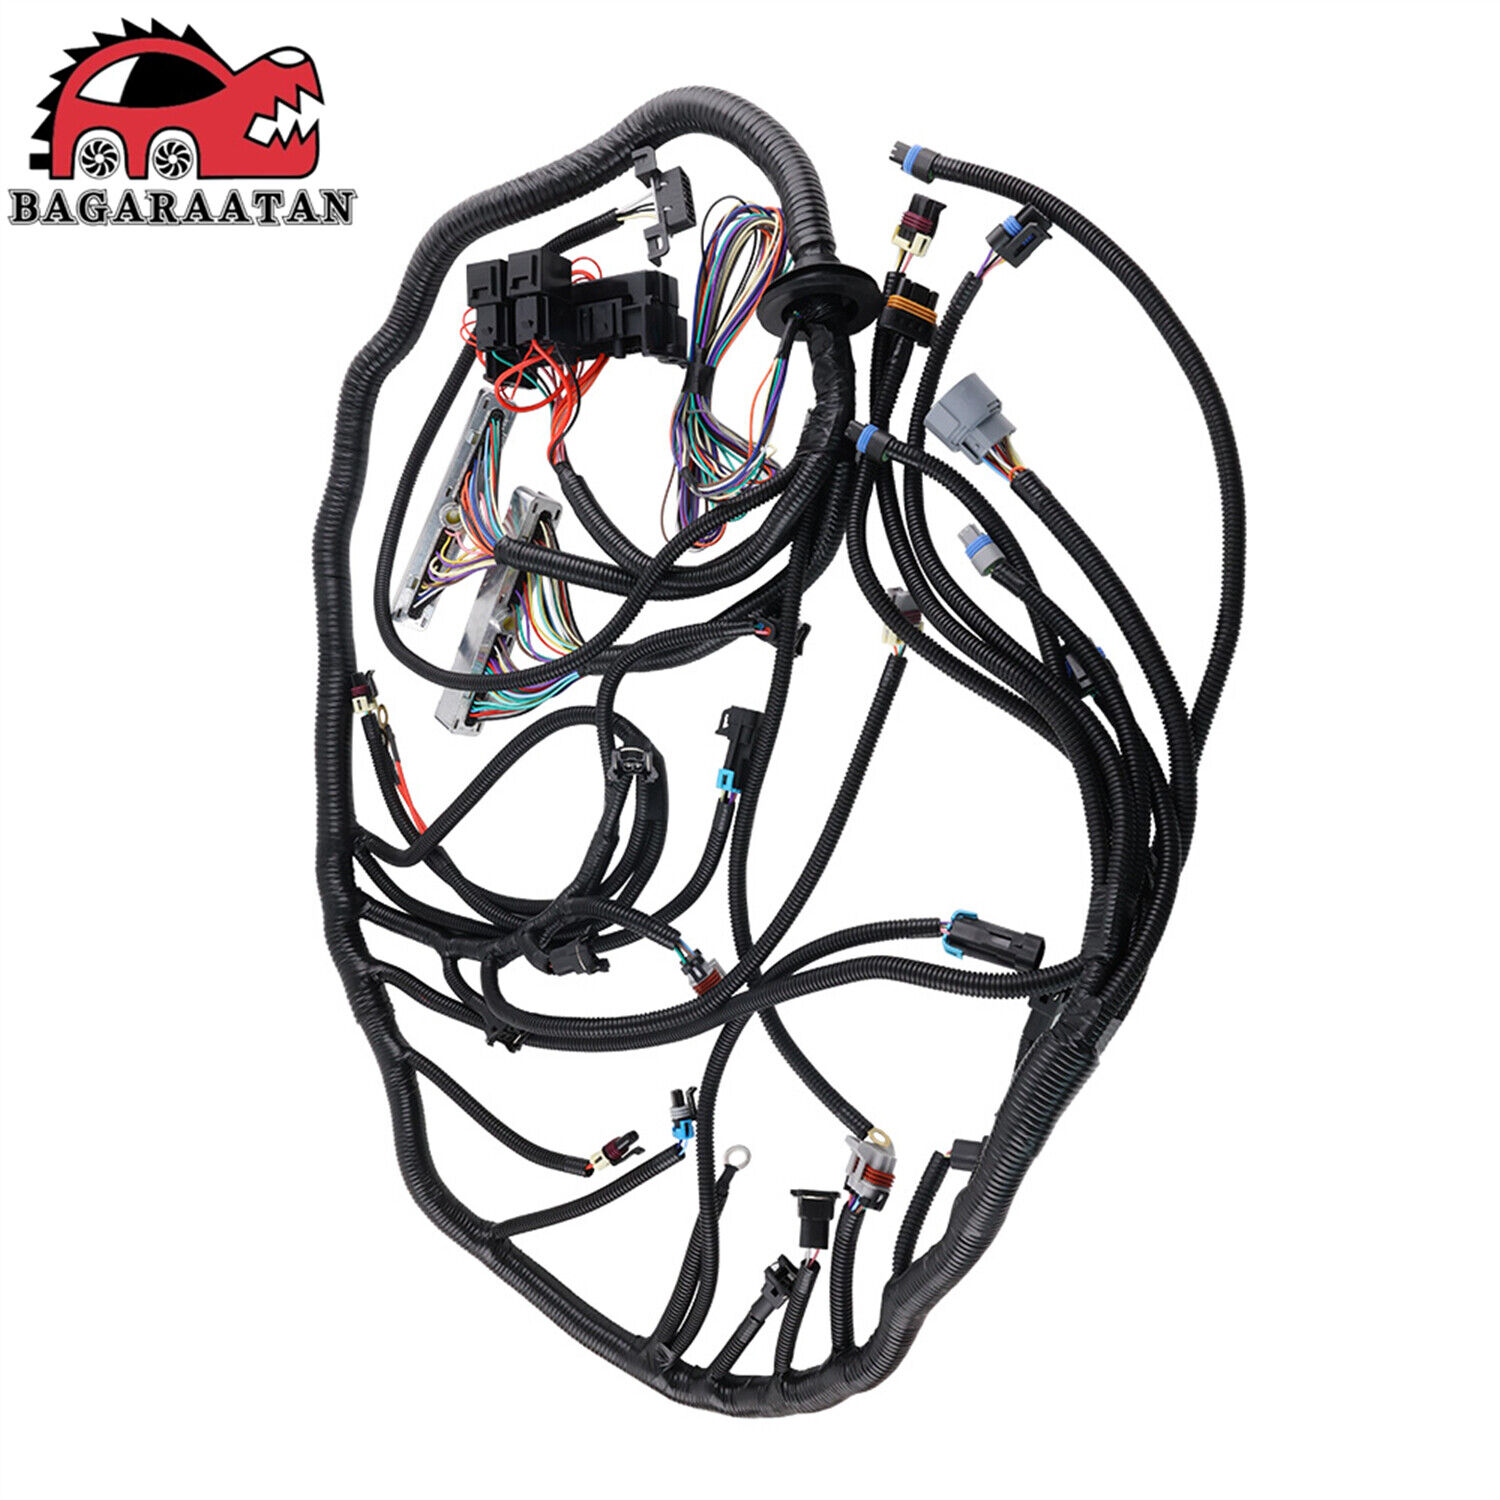 Stand Alone Harness 4L60E For Drive by Cable DBC 1997-06 LS1 LS SWAP 4.8 5.3 6.0